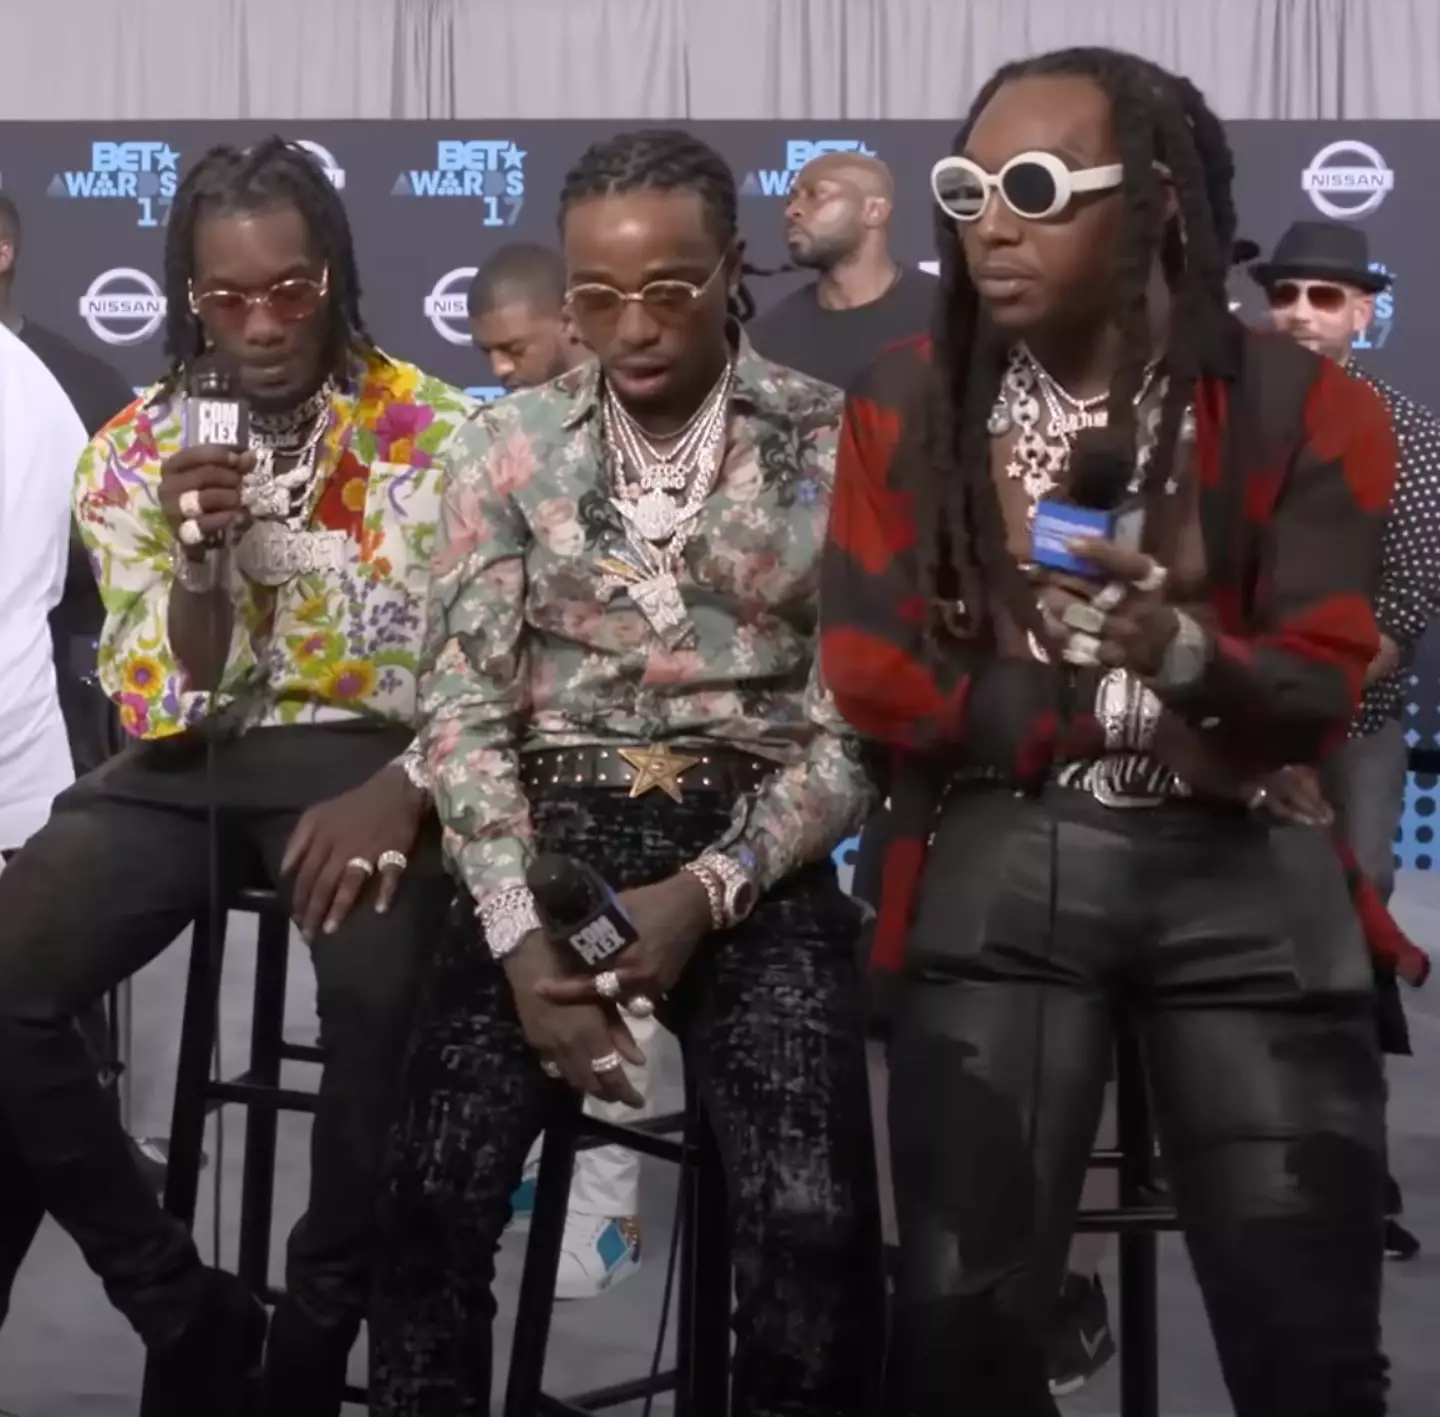 Offset clarifies he's not biologically related to Takeoff and Quavo.